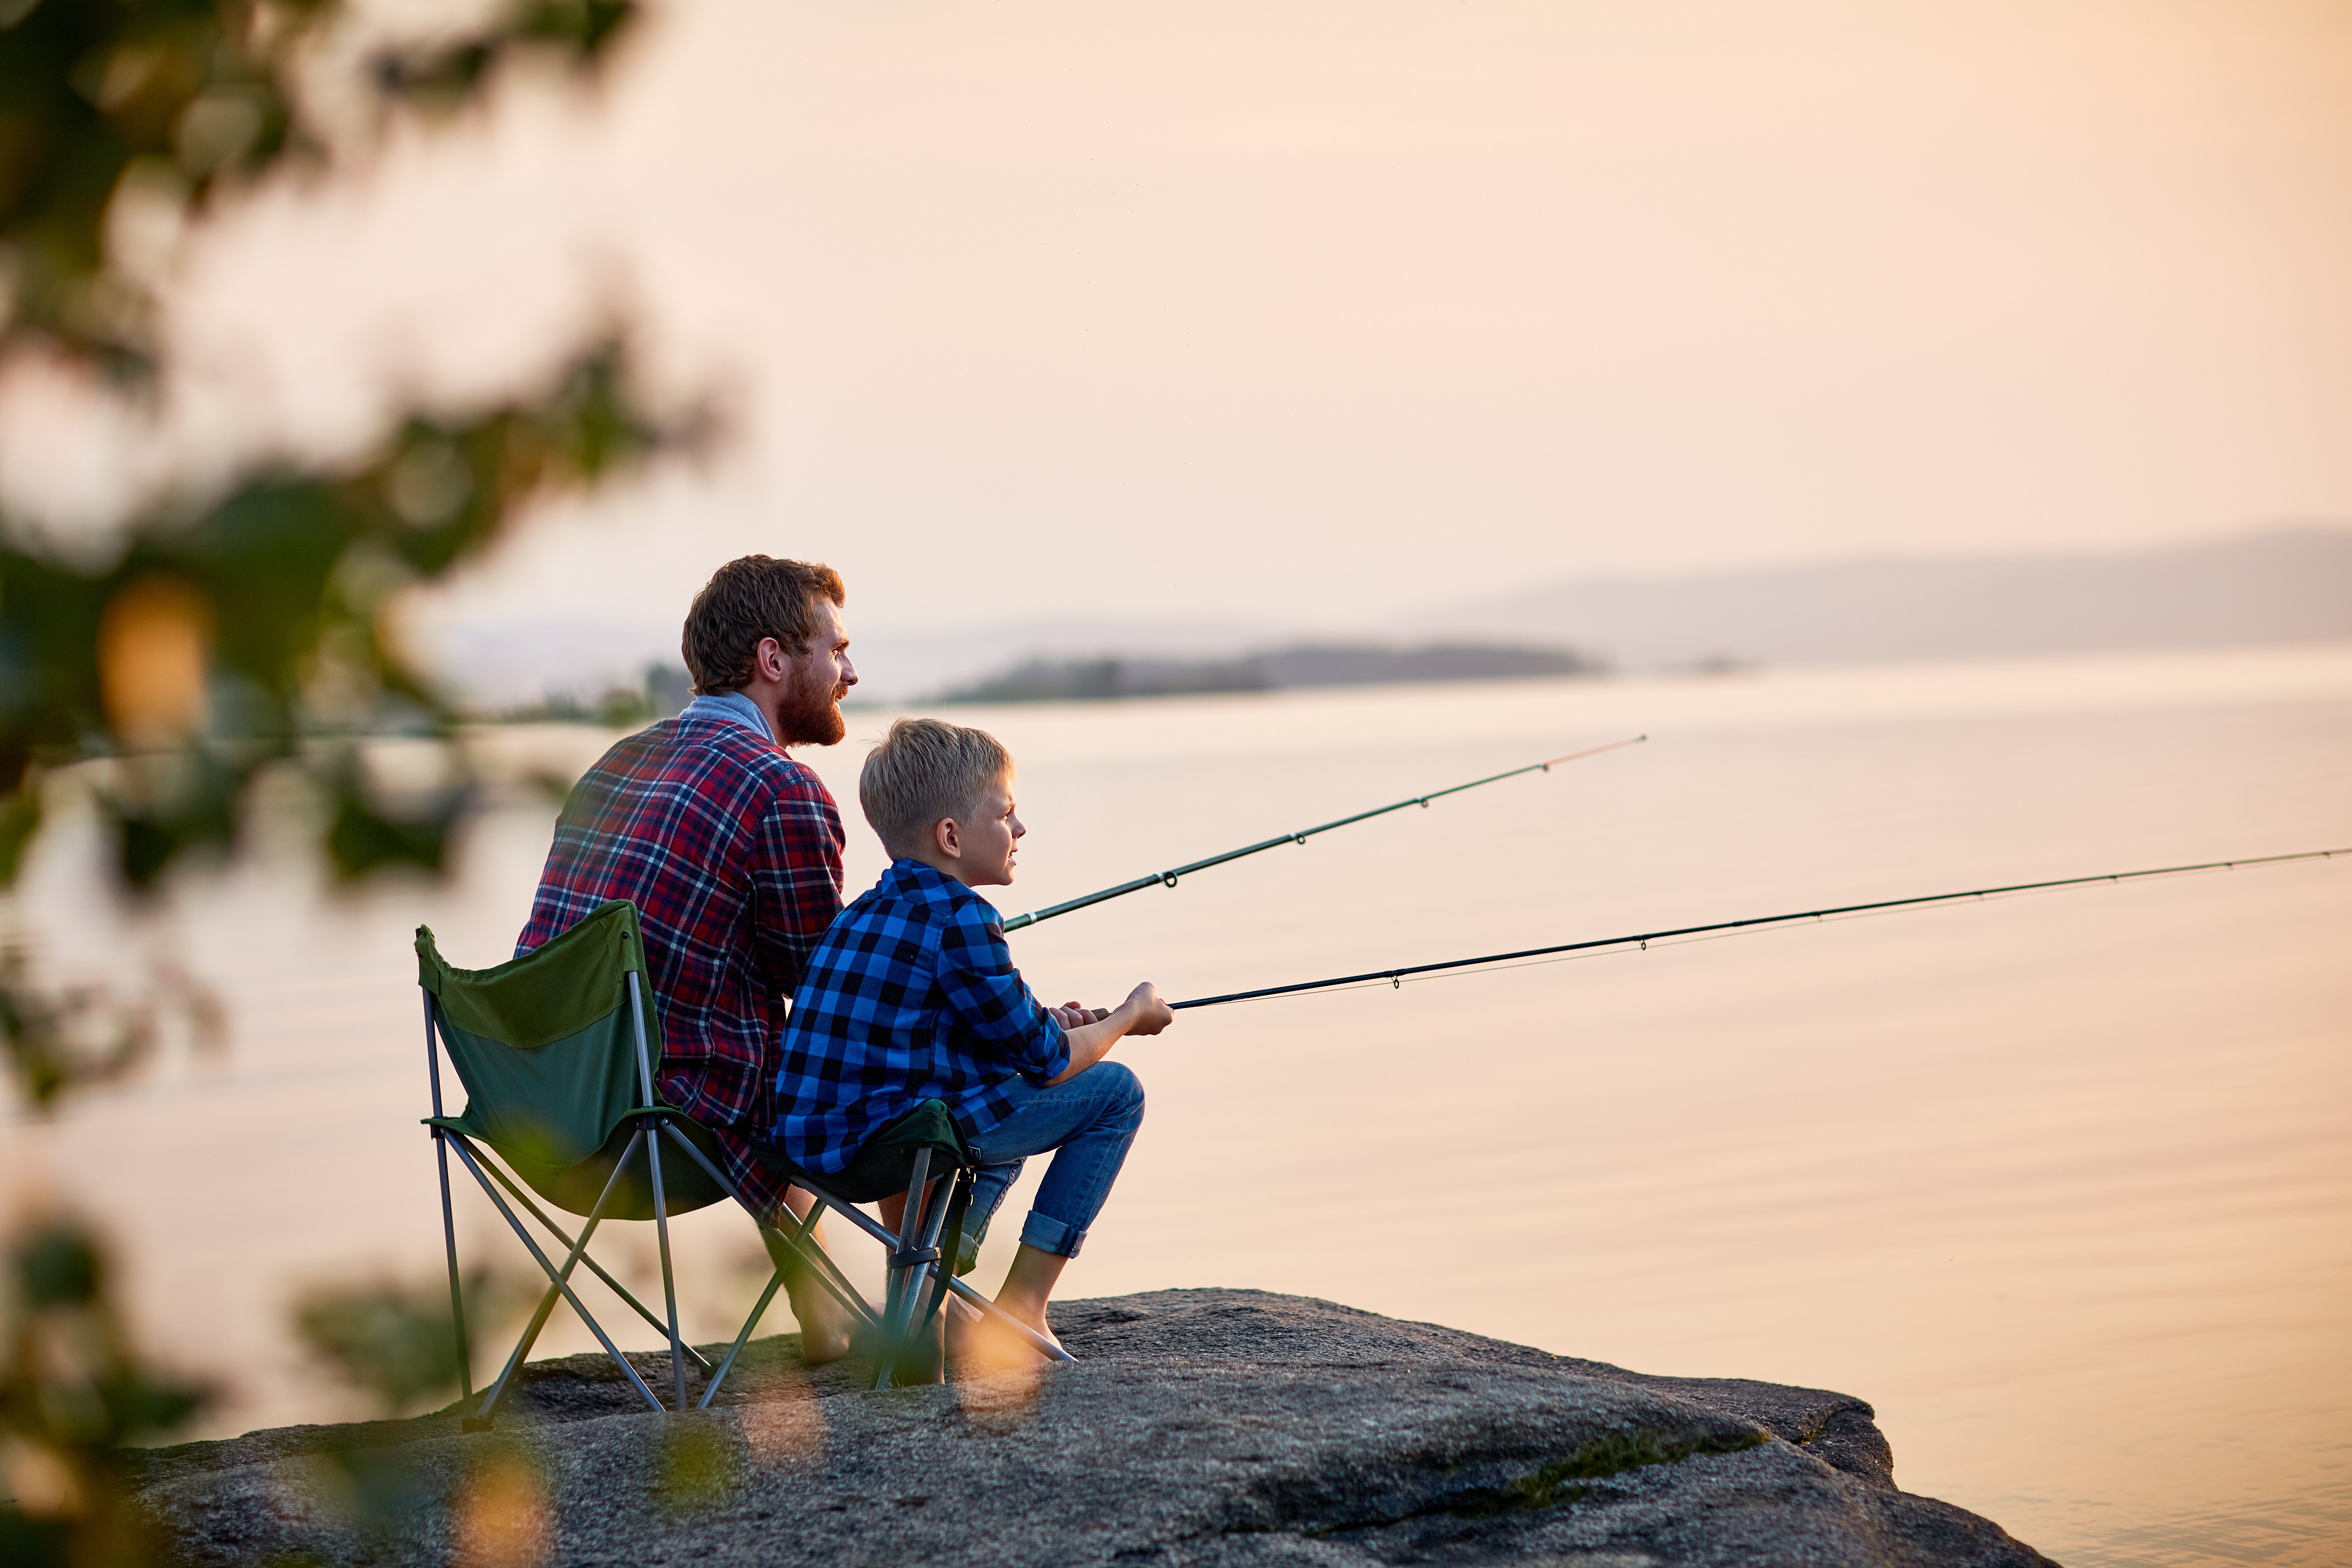 Jordan and his father frequented lakes and fished with his father | Source: Shutterstock